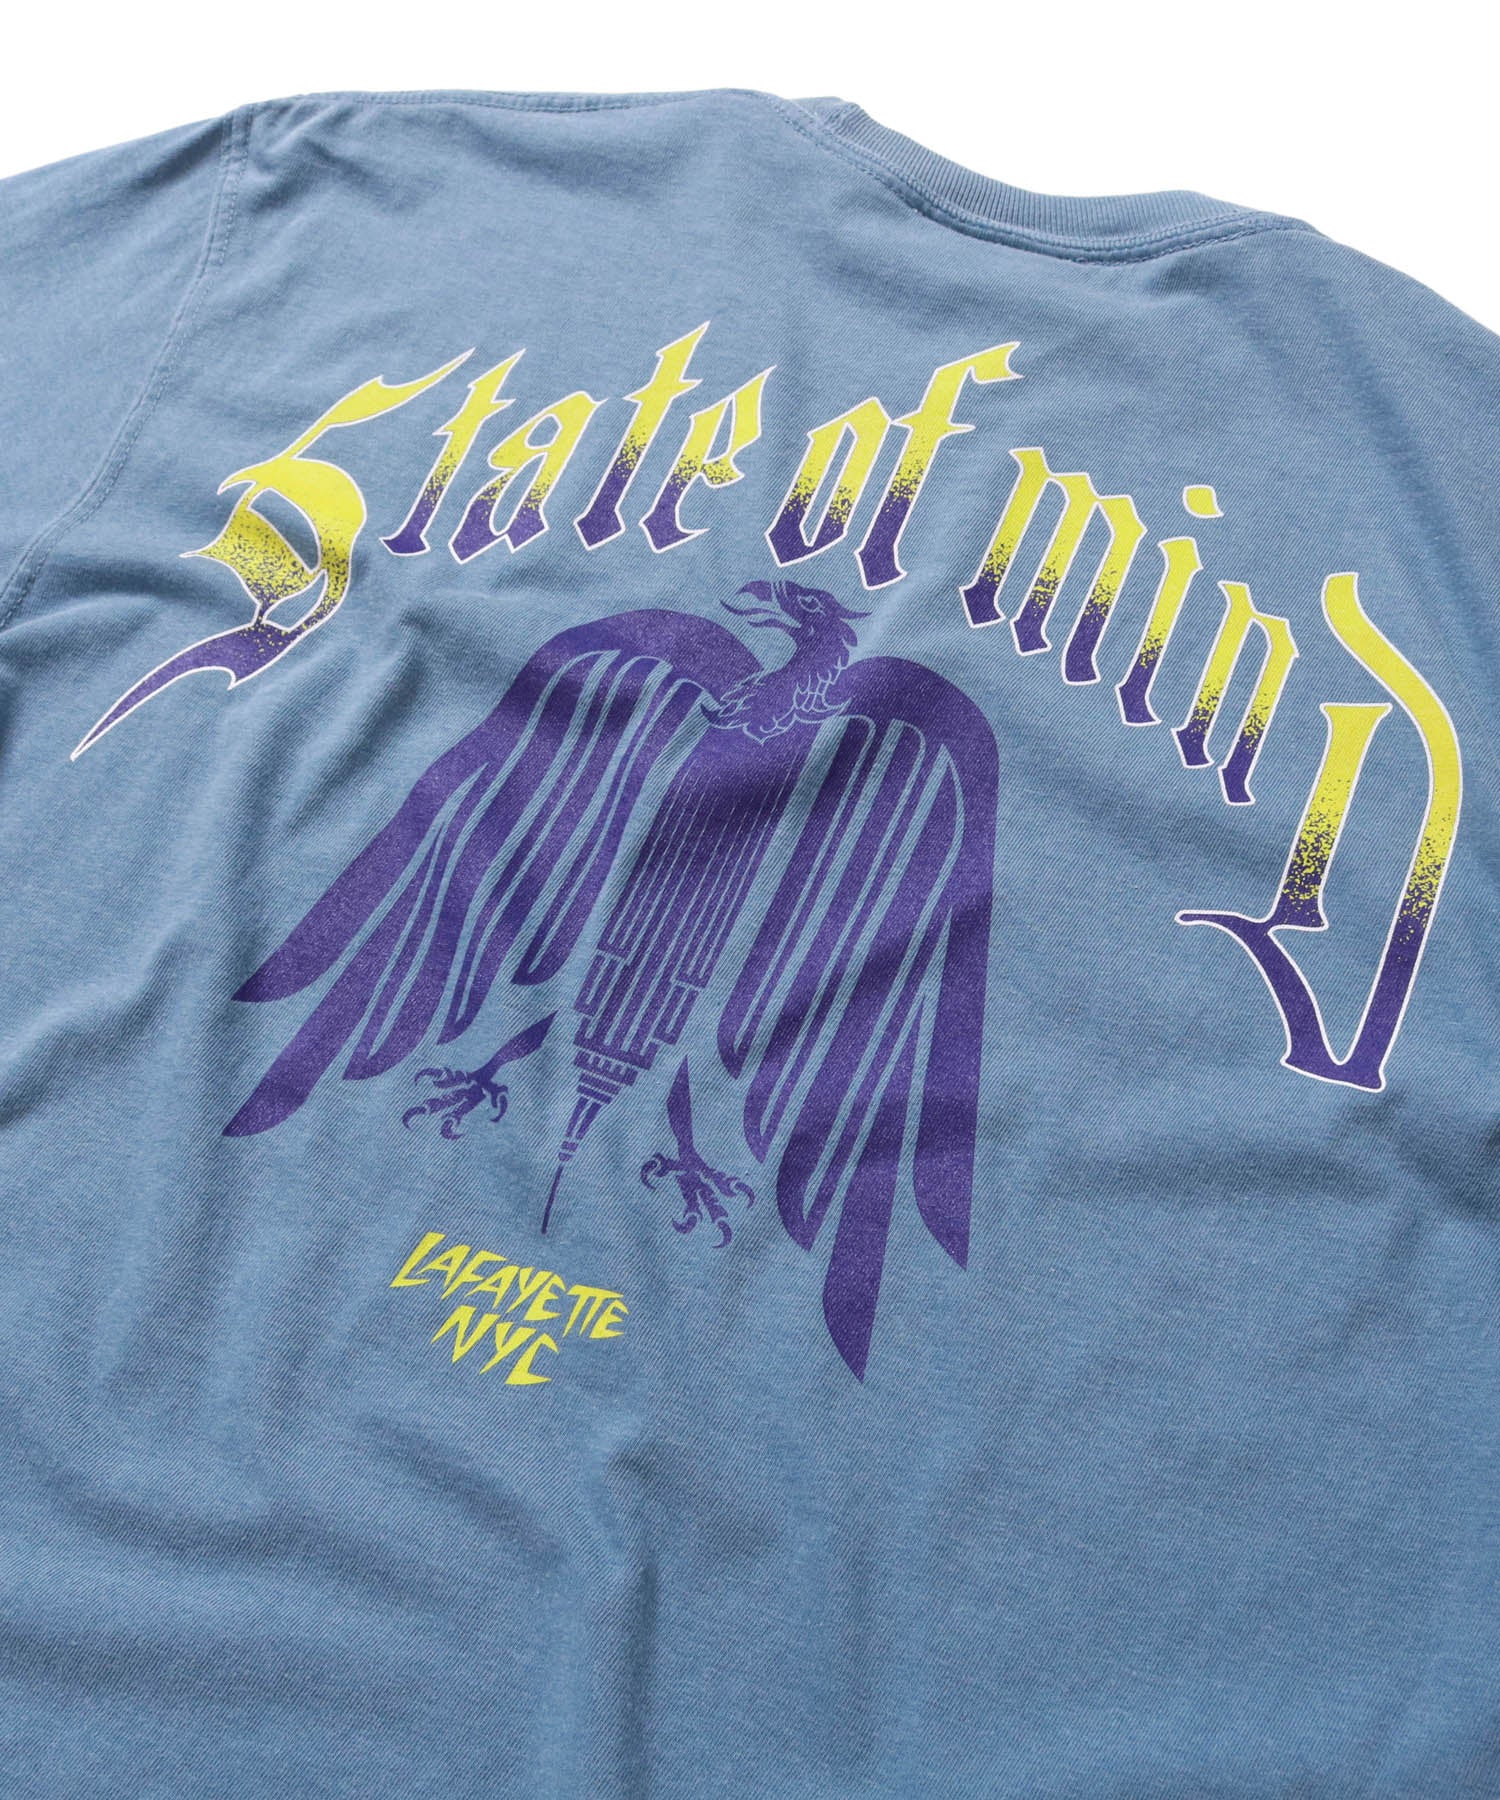 LFYT STATE OF MIND Tee BLUE